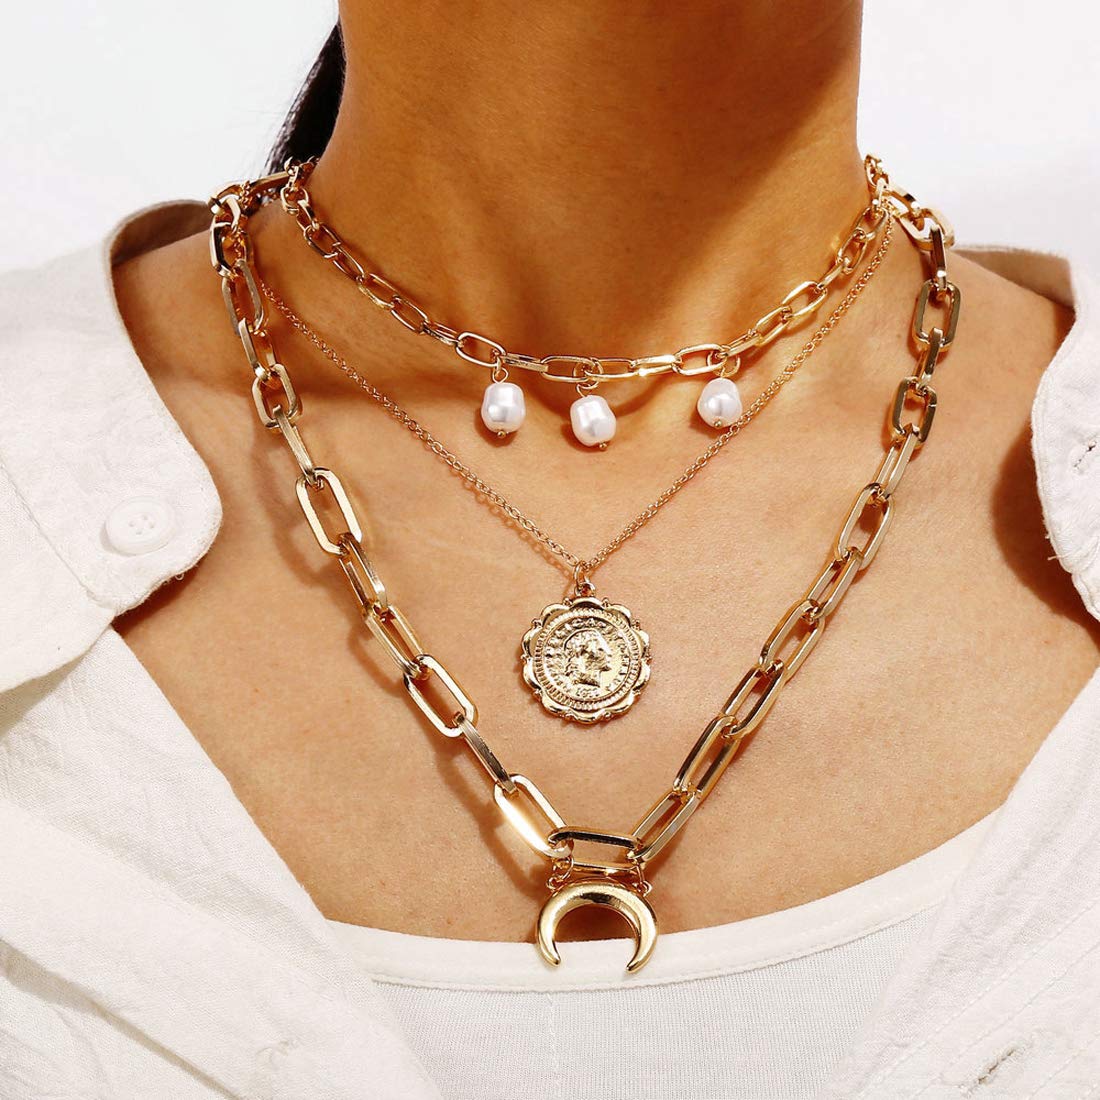 Arzonai Female Necklace Elegant Women? s Metal Necklace Casual Three-Layered Sweater Chain for Women